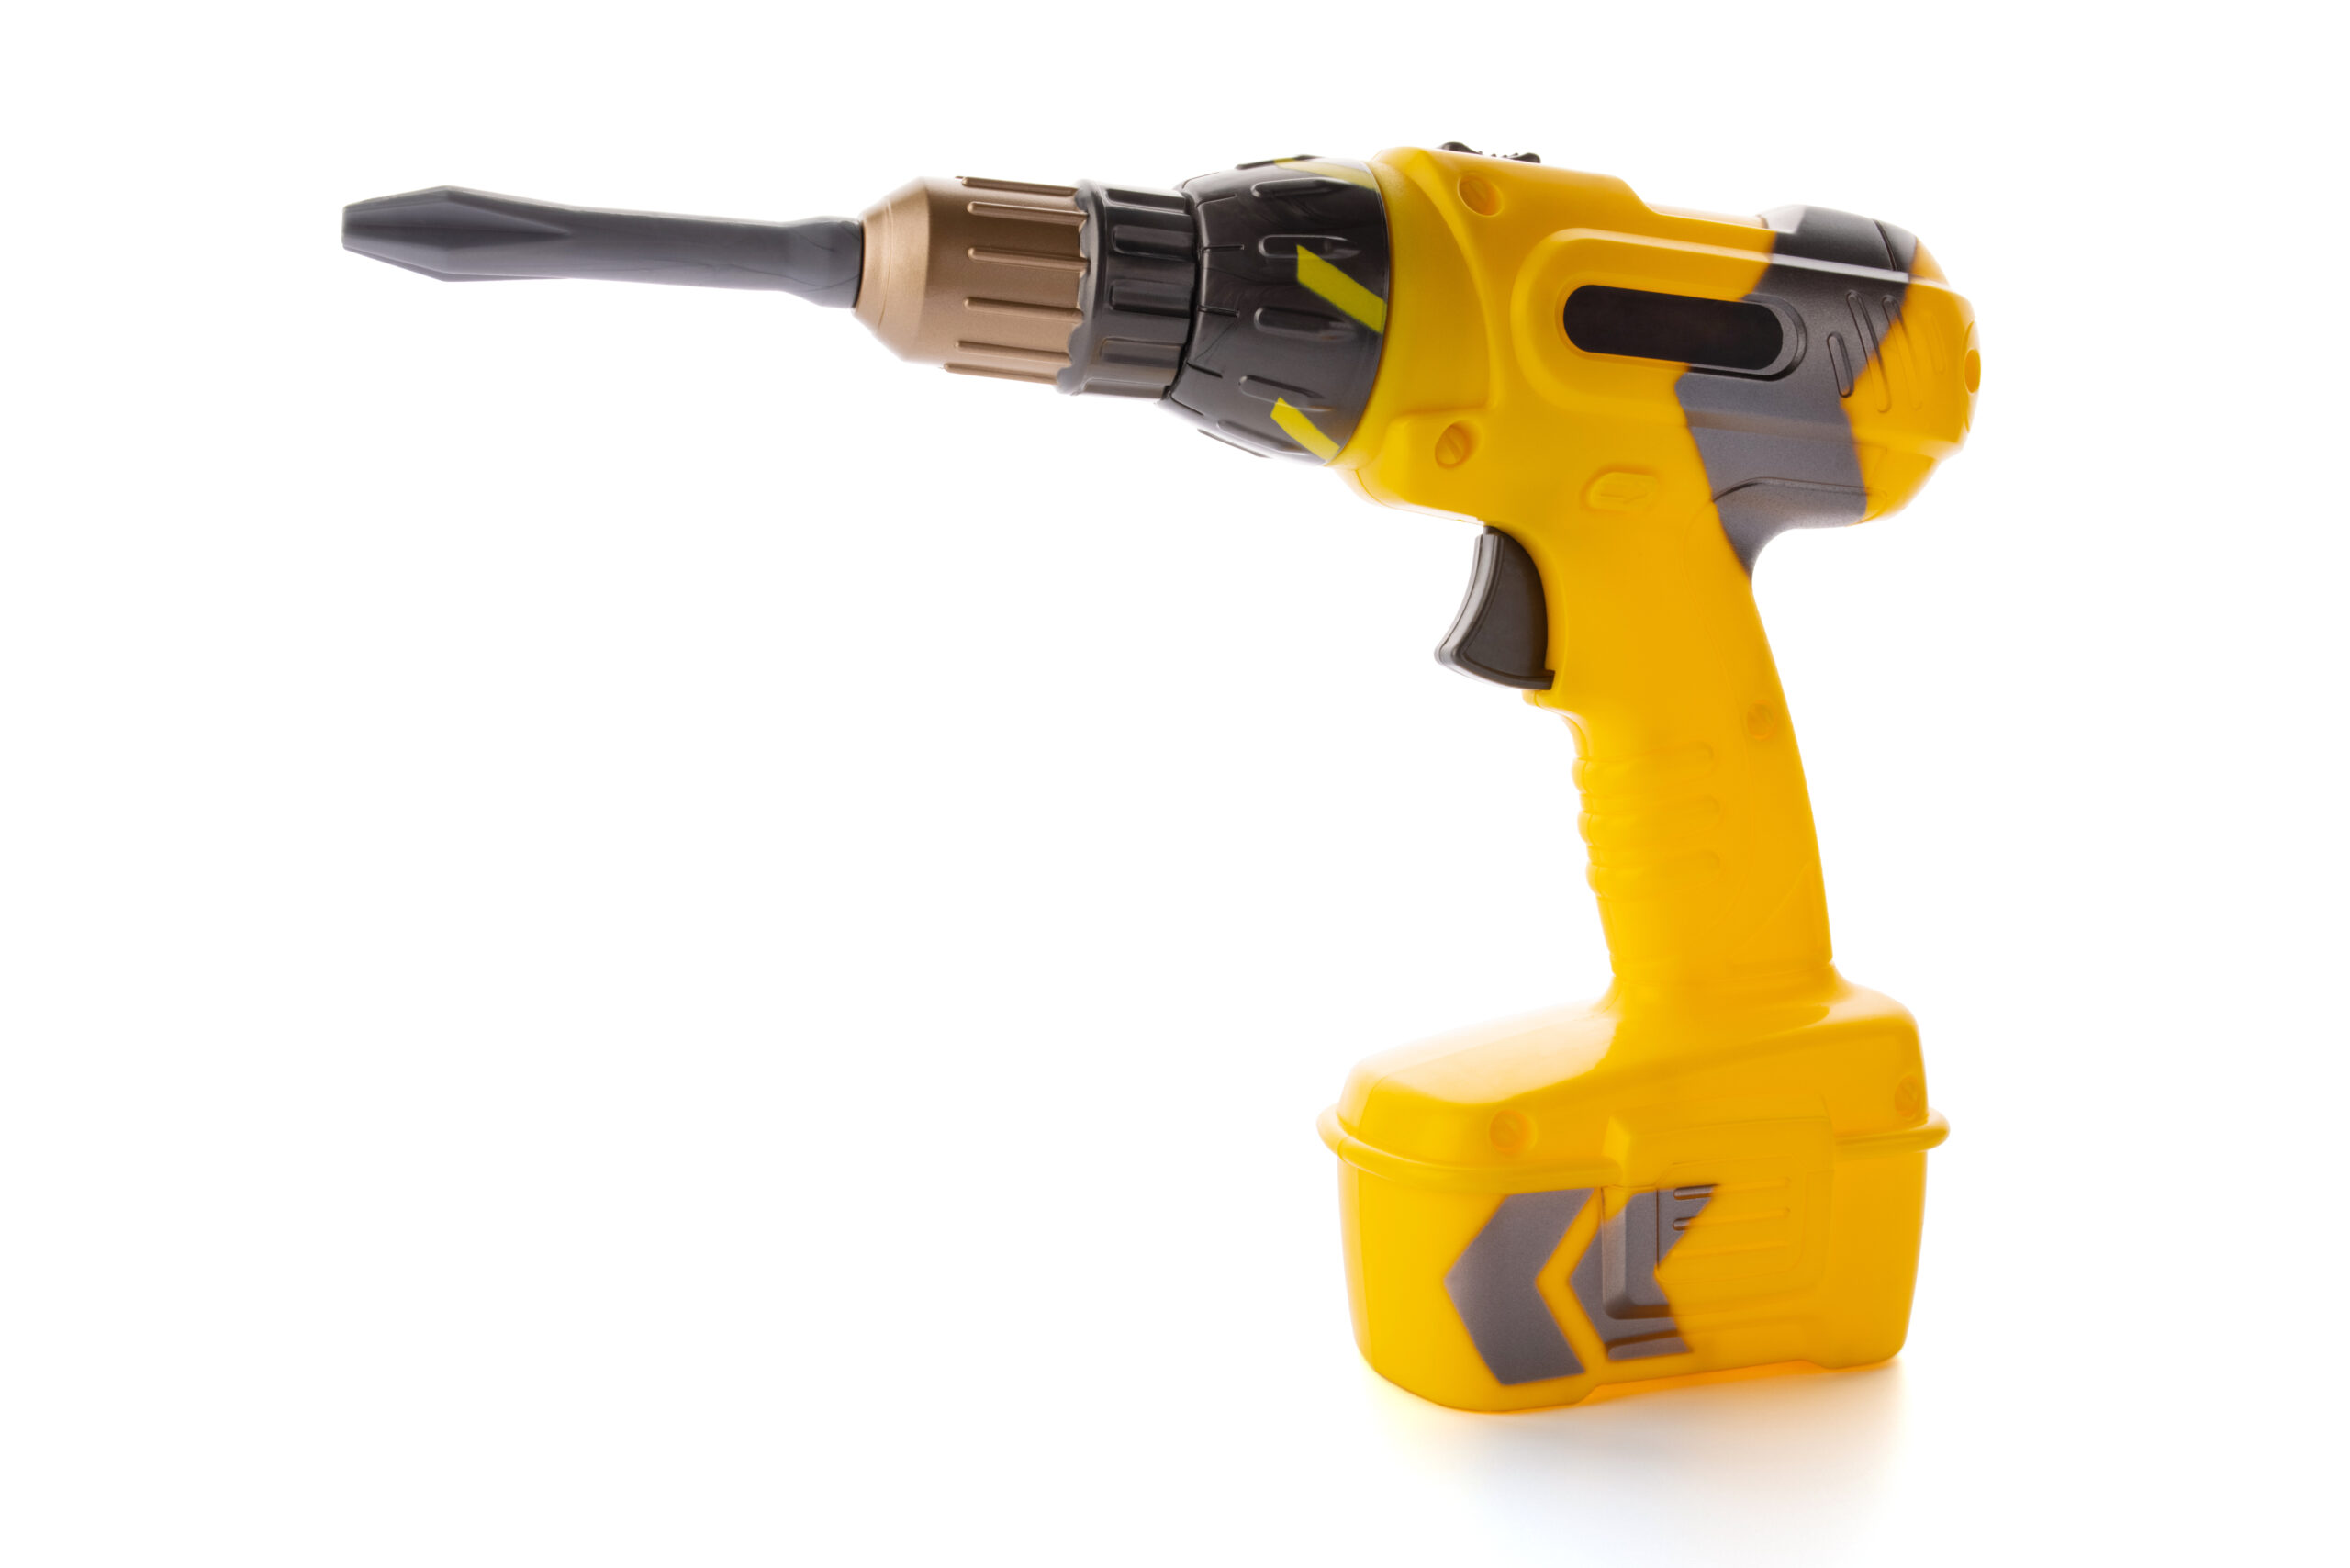 theprecisiontools.com : What is the advantage of a cordless drill?